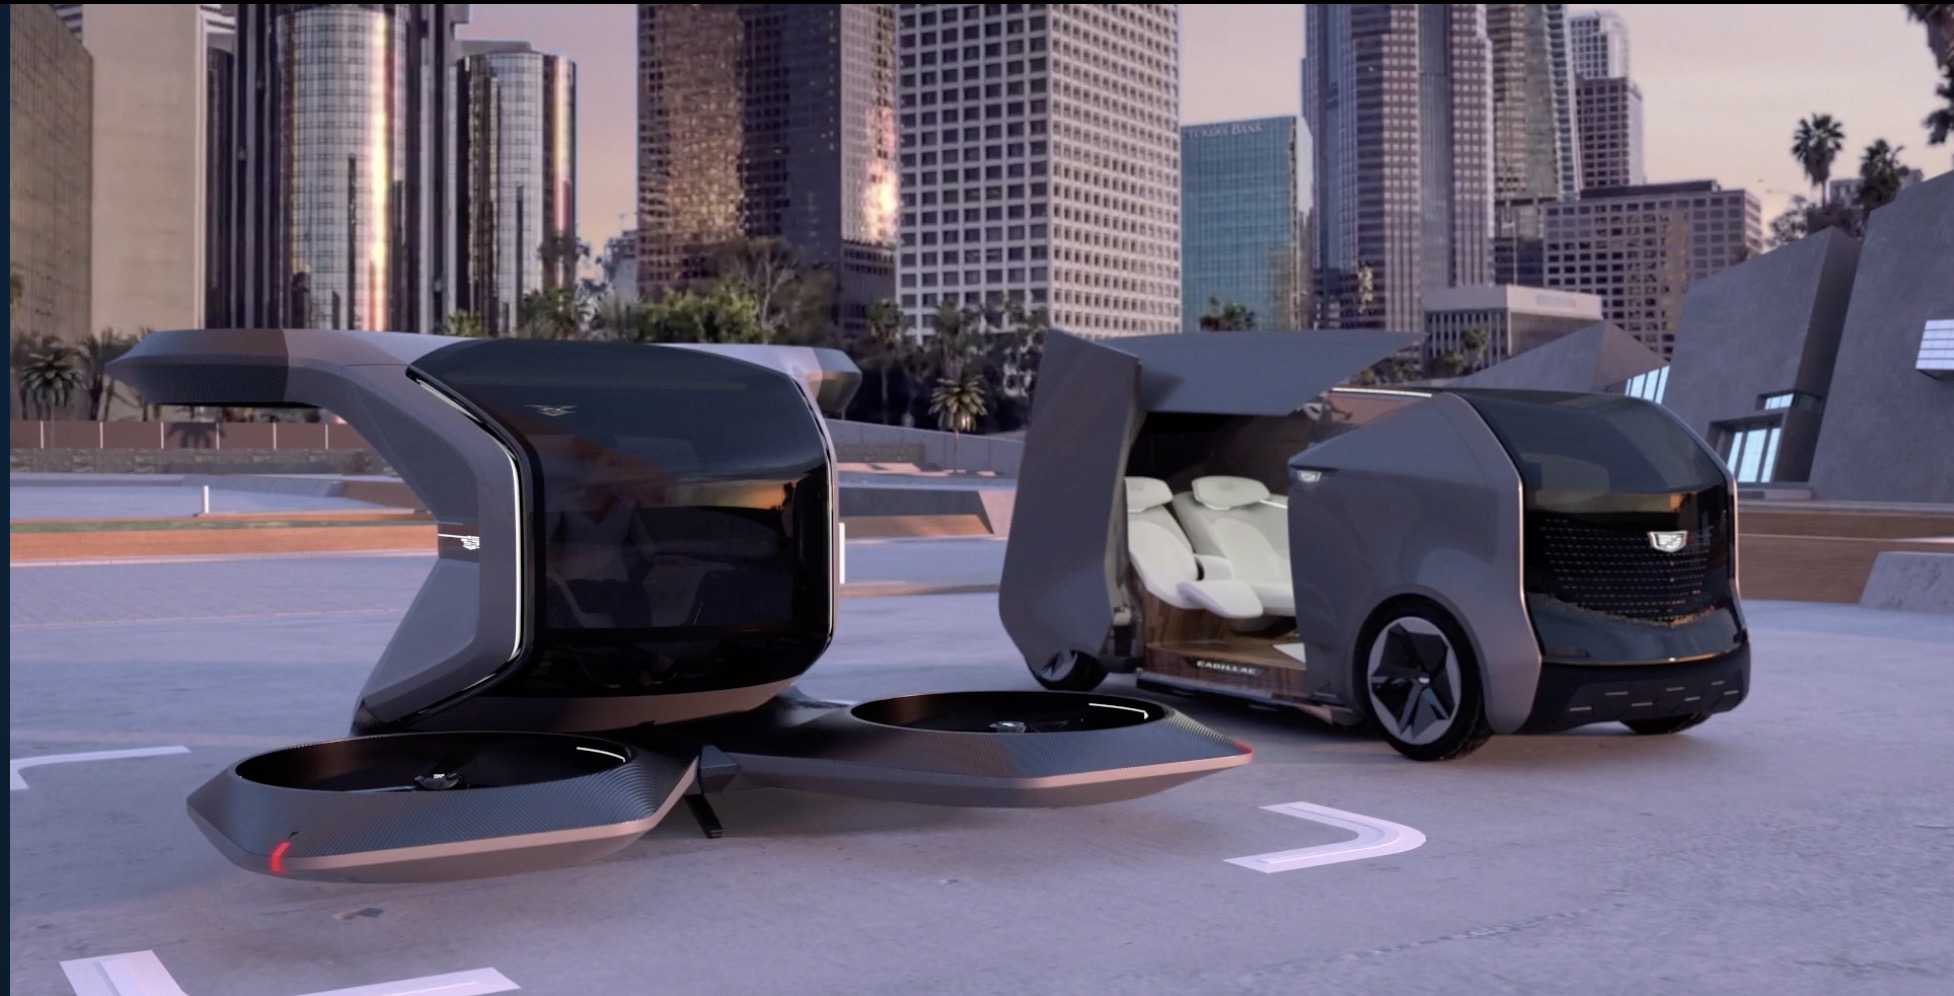 CES trends and Uber plots another spinoff – TechCrunch